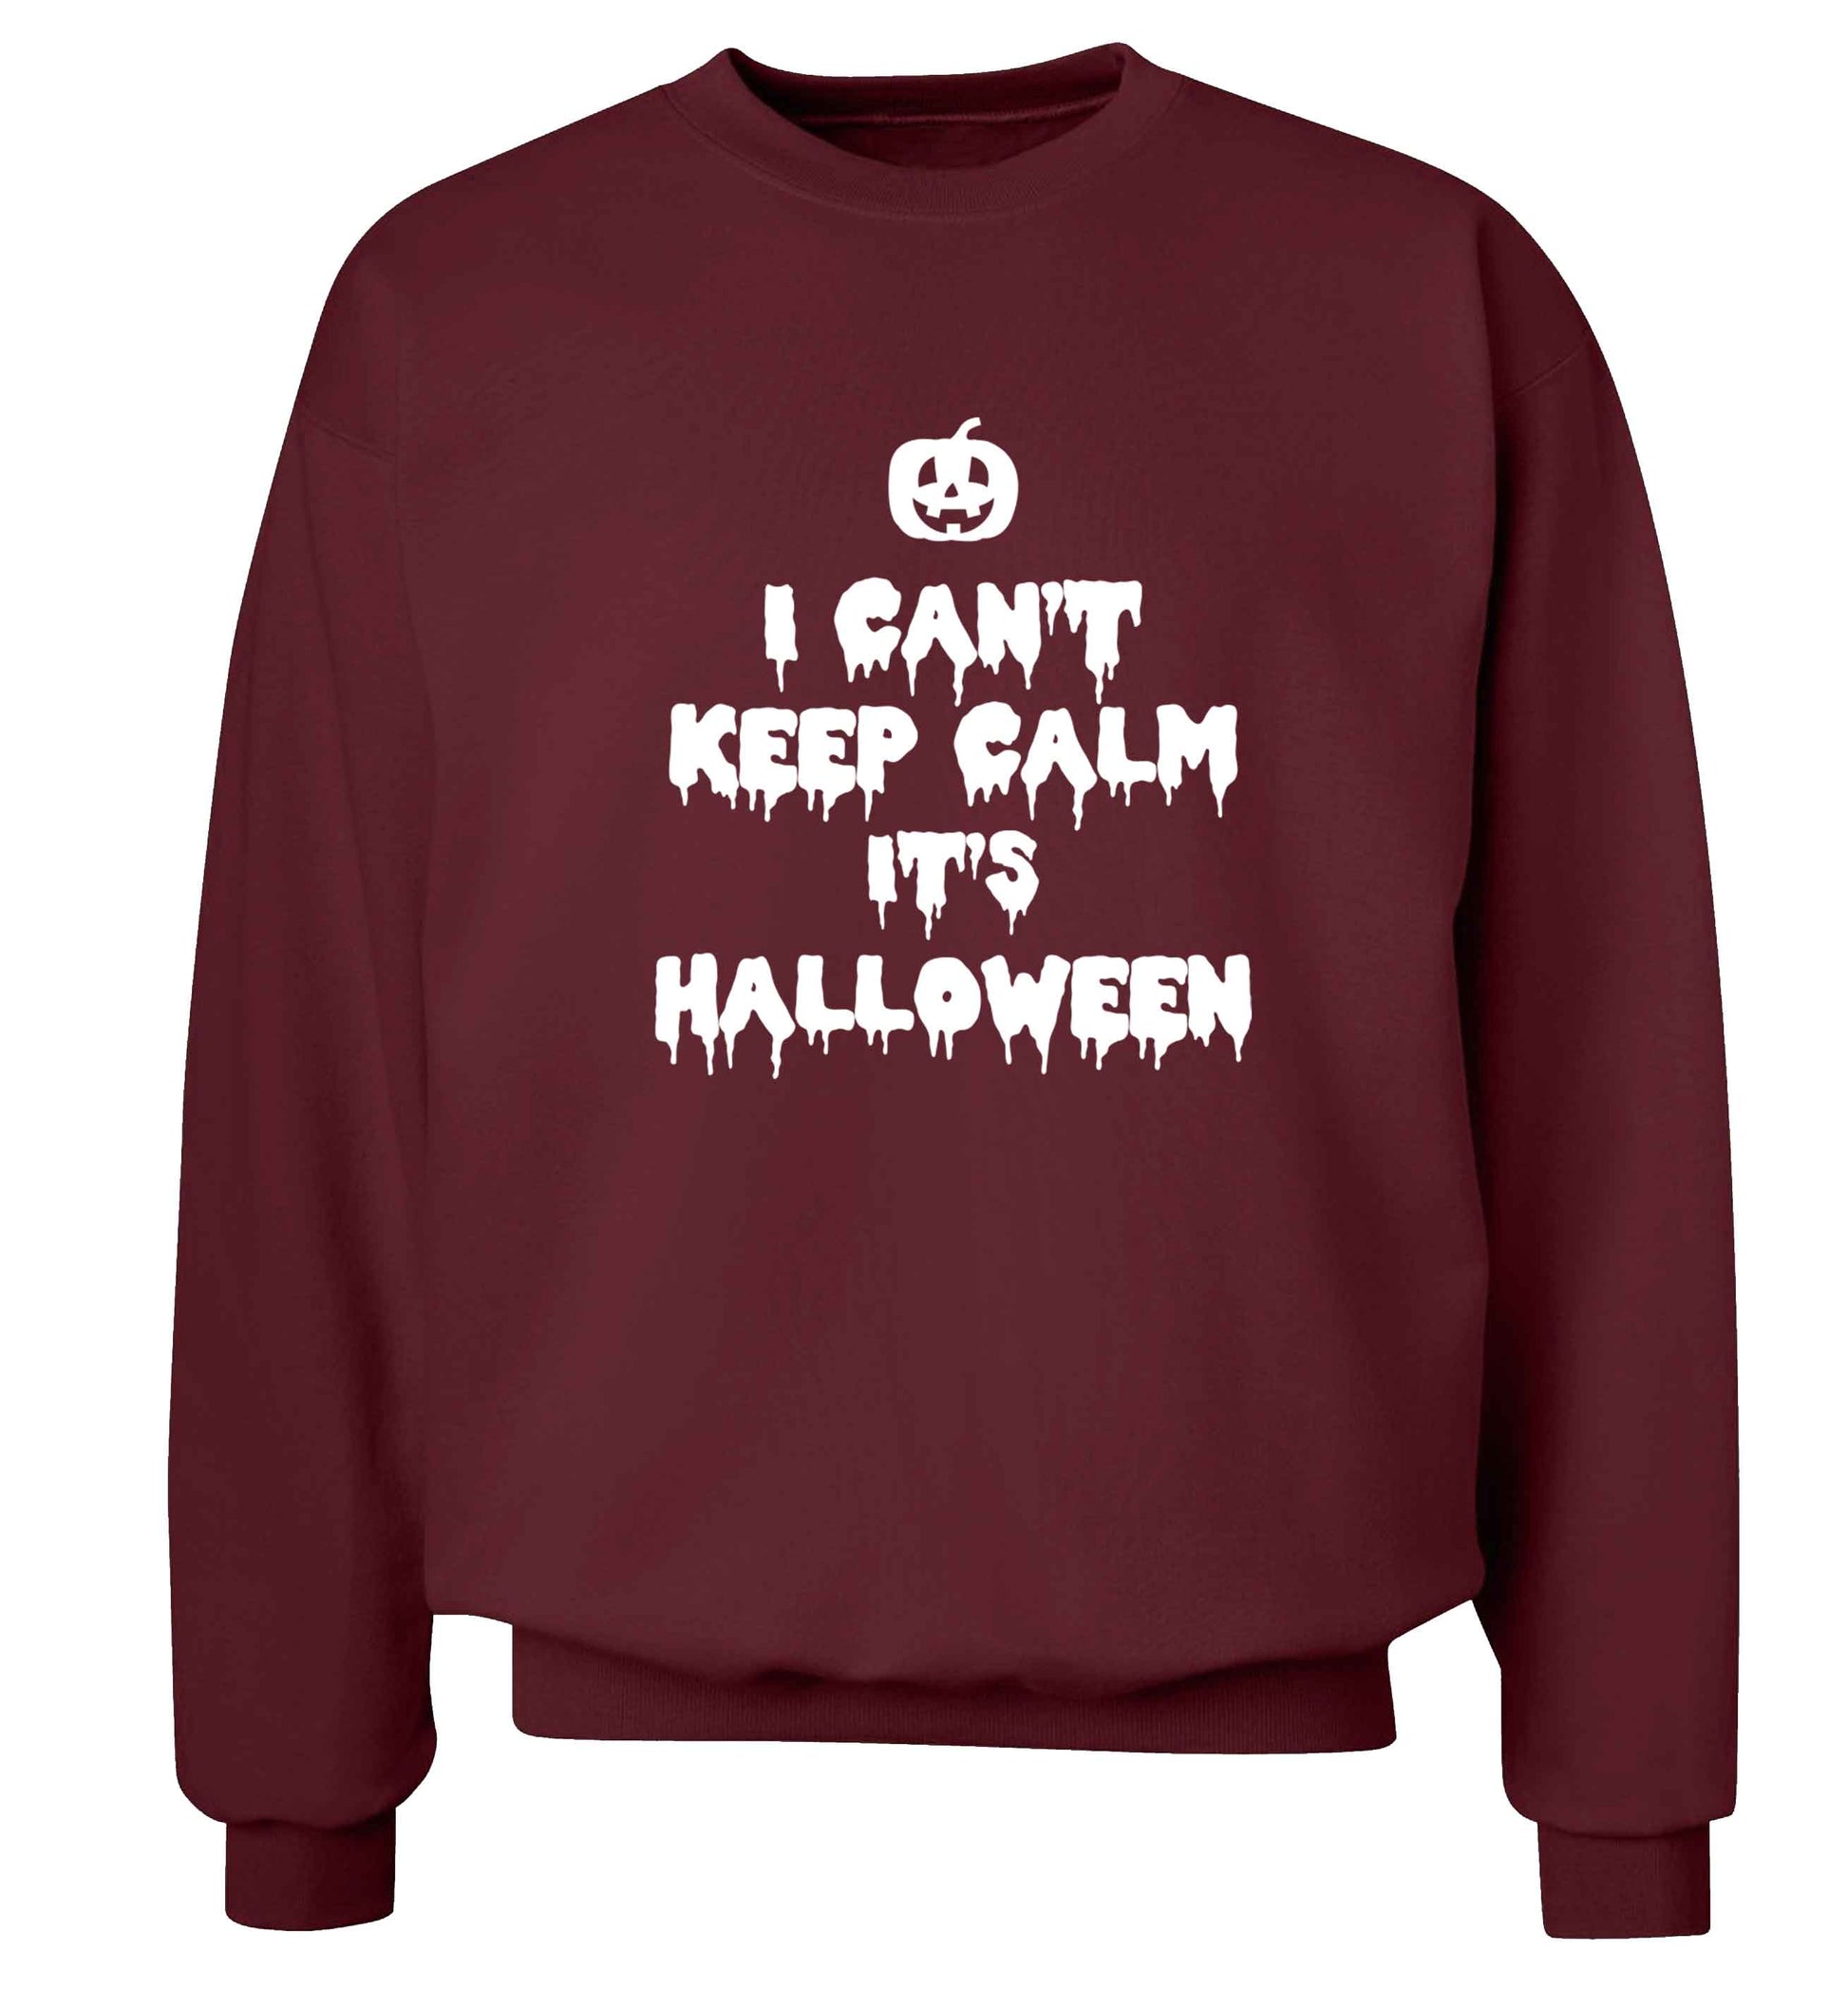 I can't keep calm it's halloween adult's unisex maroon sweater 2XL